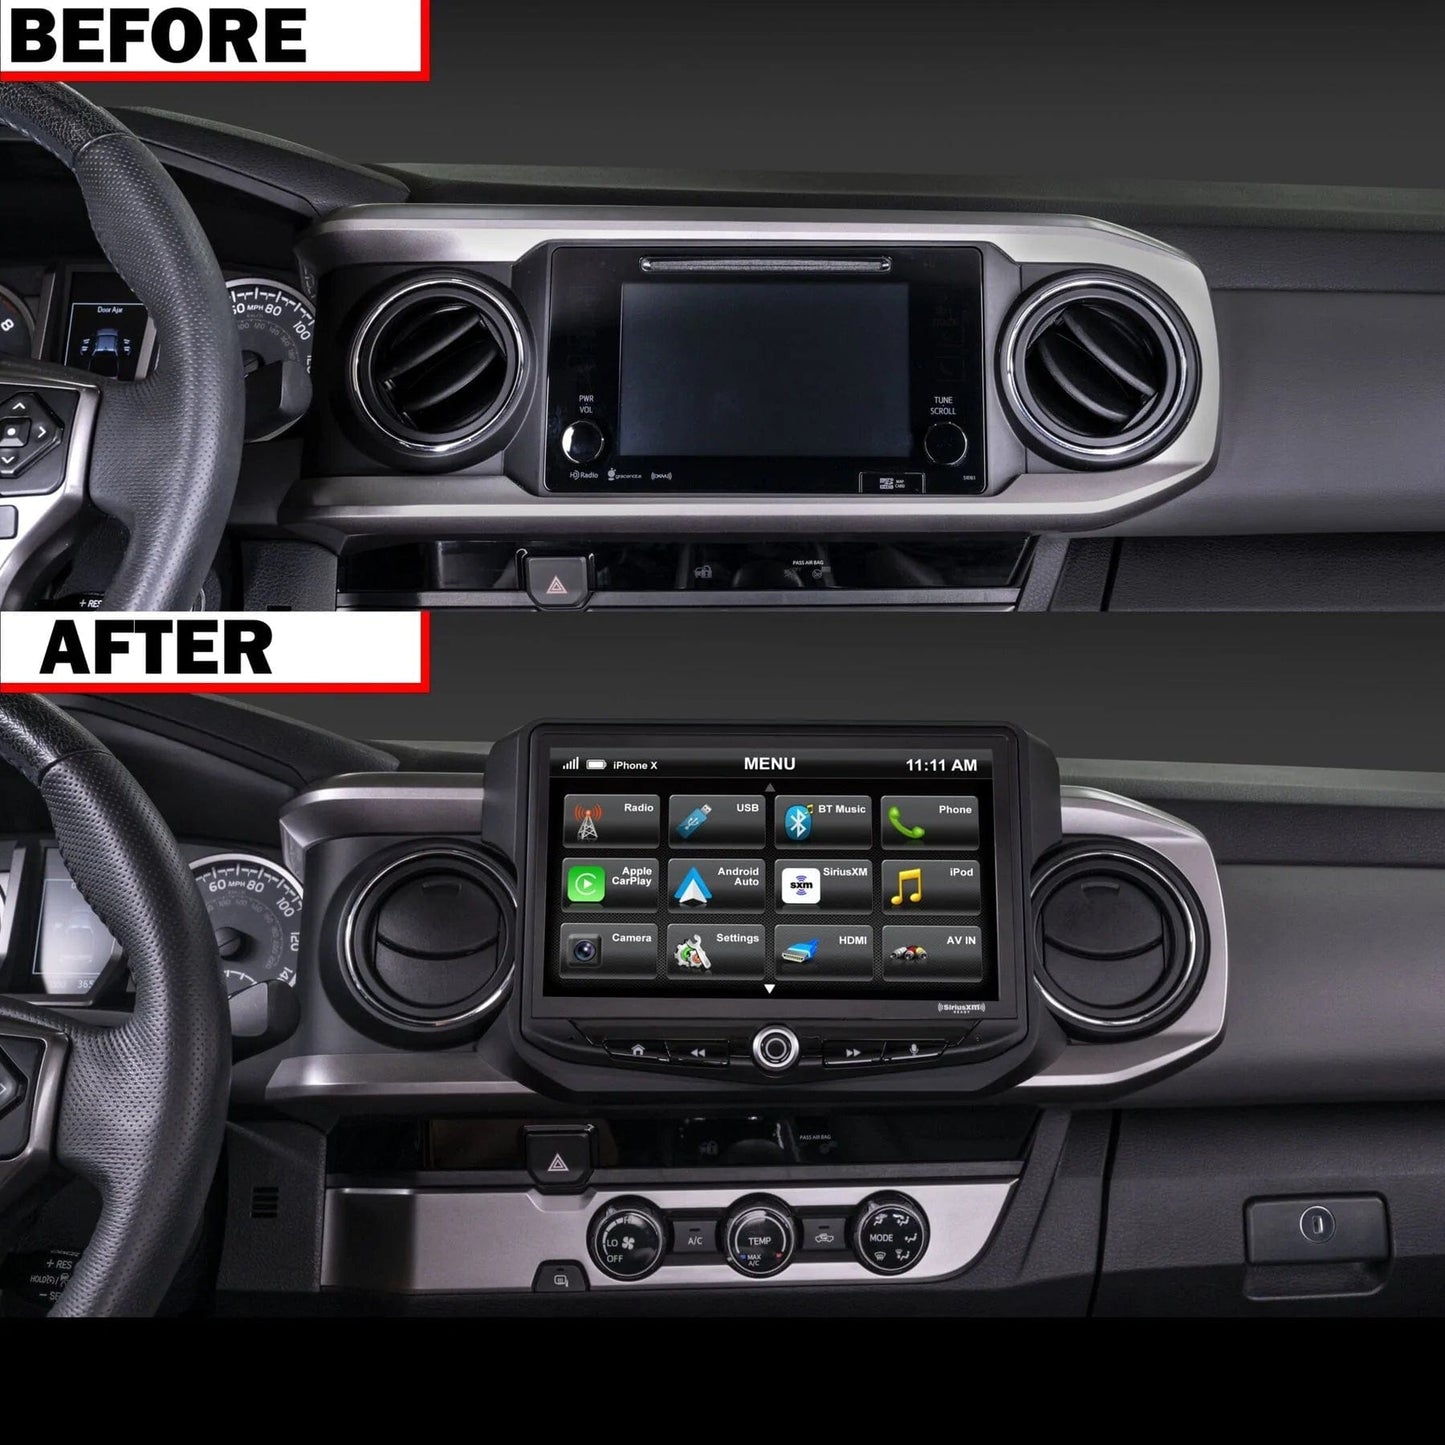 TacomaForce TOYOTA TACOMA (2016-2022) Heigh10 RADIO REPLACEMENT KIT - INCLUDES 10" TOUCHSCREEN RADIO & PLUG-AND-PLAY INSTALLATION